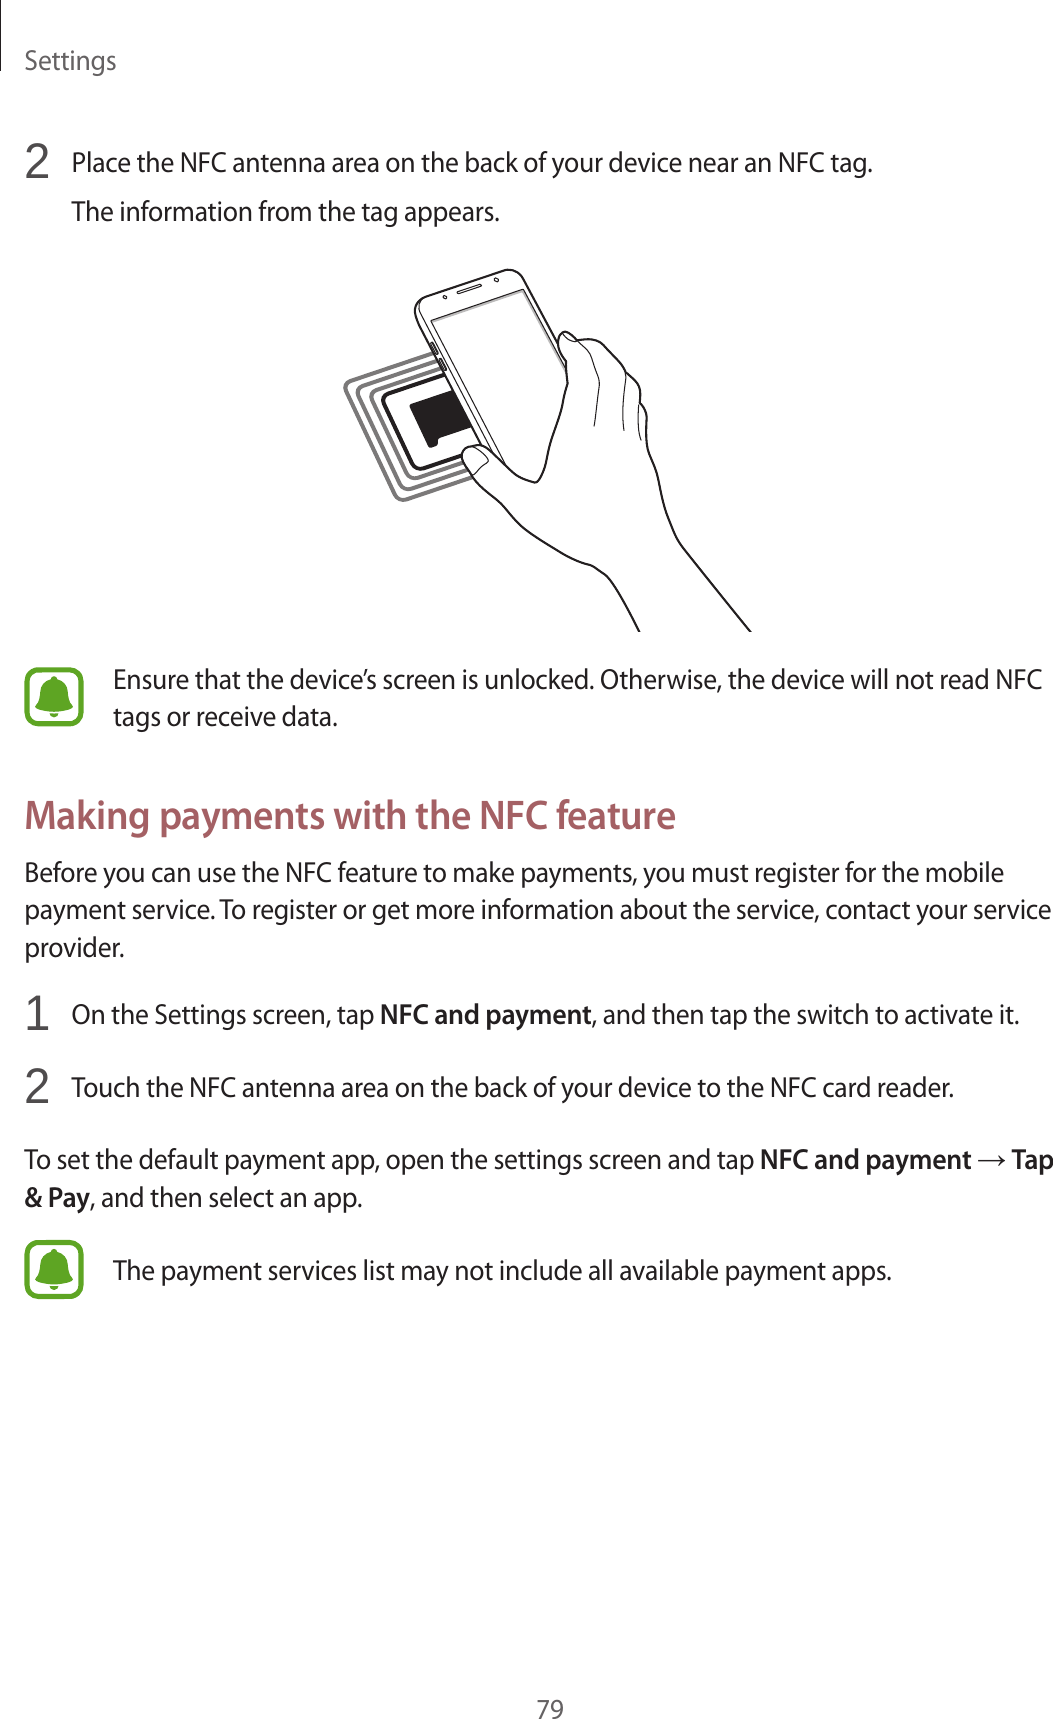 Settings792  Place the NFC antenna area on the back of your device near an NFC tag.The information from the tag appears.Ensure that the device’s screen is unlocked. Otherwise, the device will not read NFC tags or receive data.Making payments with the NFC featureBefore you can use the NFC feature to make payments, you must register for the mobile payment service. To register or get more information about the service, contact your service provider.1  On the Settings screen, tap NFC and payment, and then tap the switch to activate it.2  Touch the NFC antenna area on the back of your device to the NFC card reader.To set the default payment app, open the settings screen and tap NFC and payment → Tap &amp; Pay, and then select an app.The payment services list may not include all available payment apps.